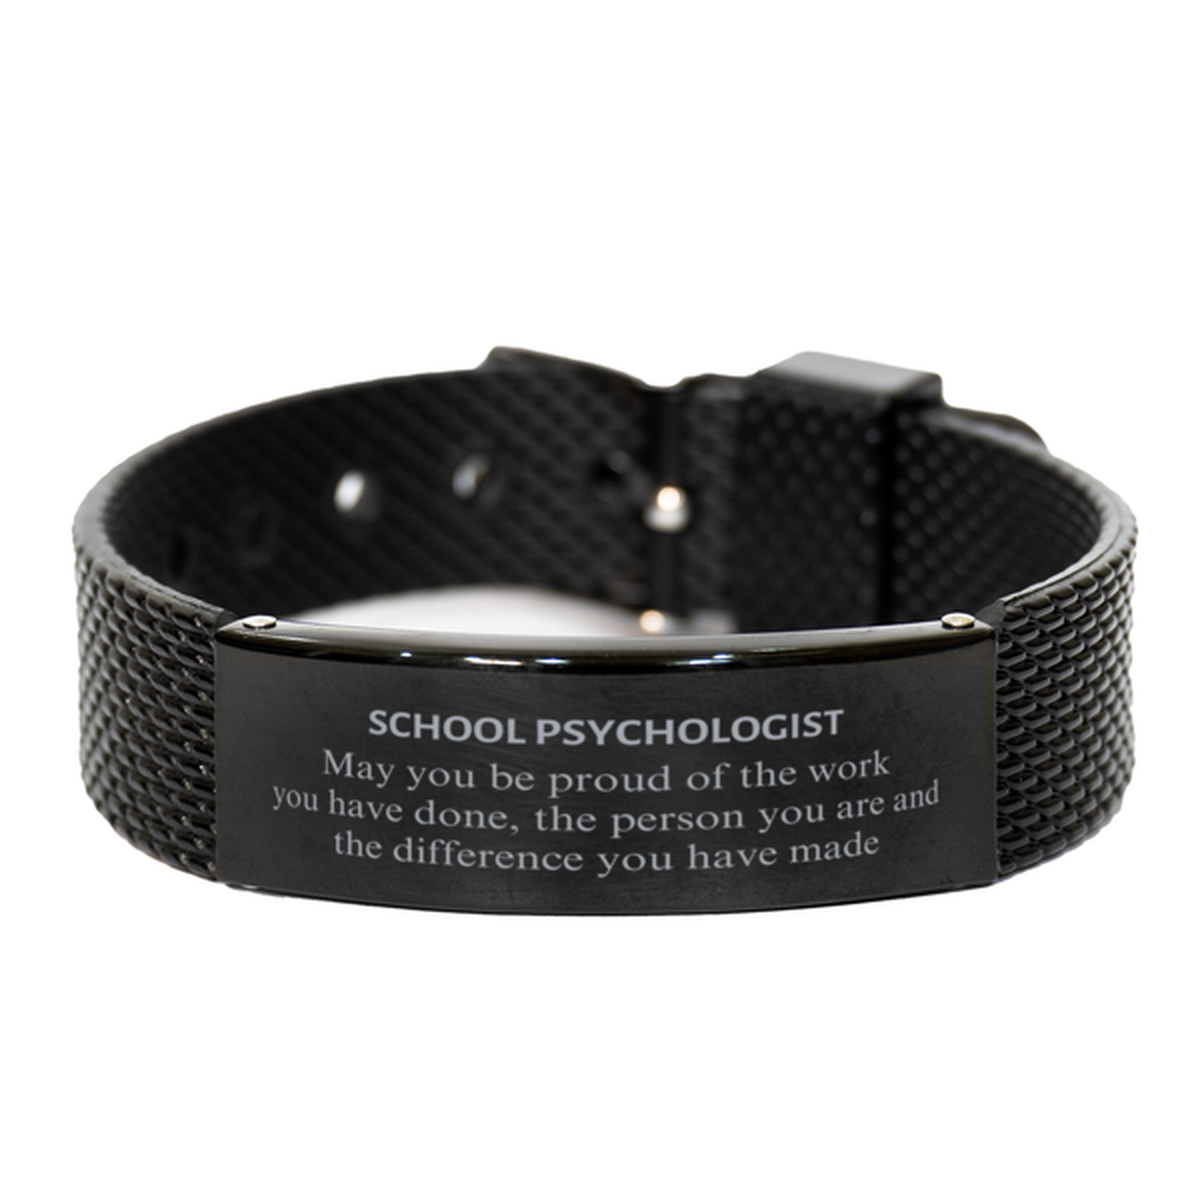 School Psychologist May you be proud of the work you have done, Retirement School Psychologist Black Shark Mesh Bracelet for Colleague Appreciation Gifts Amazing for School Psychologist